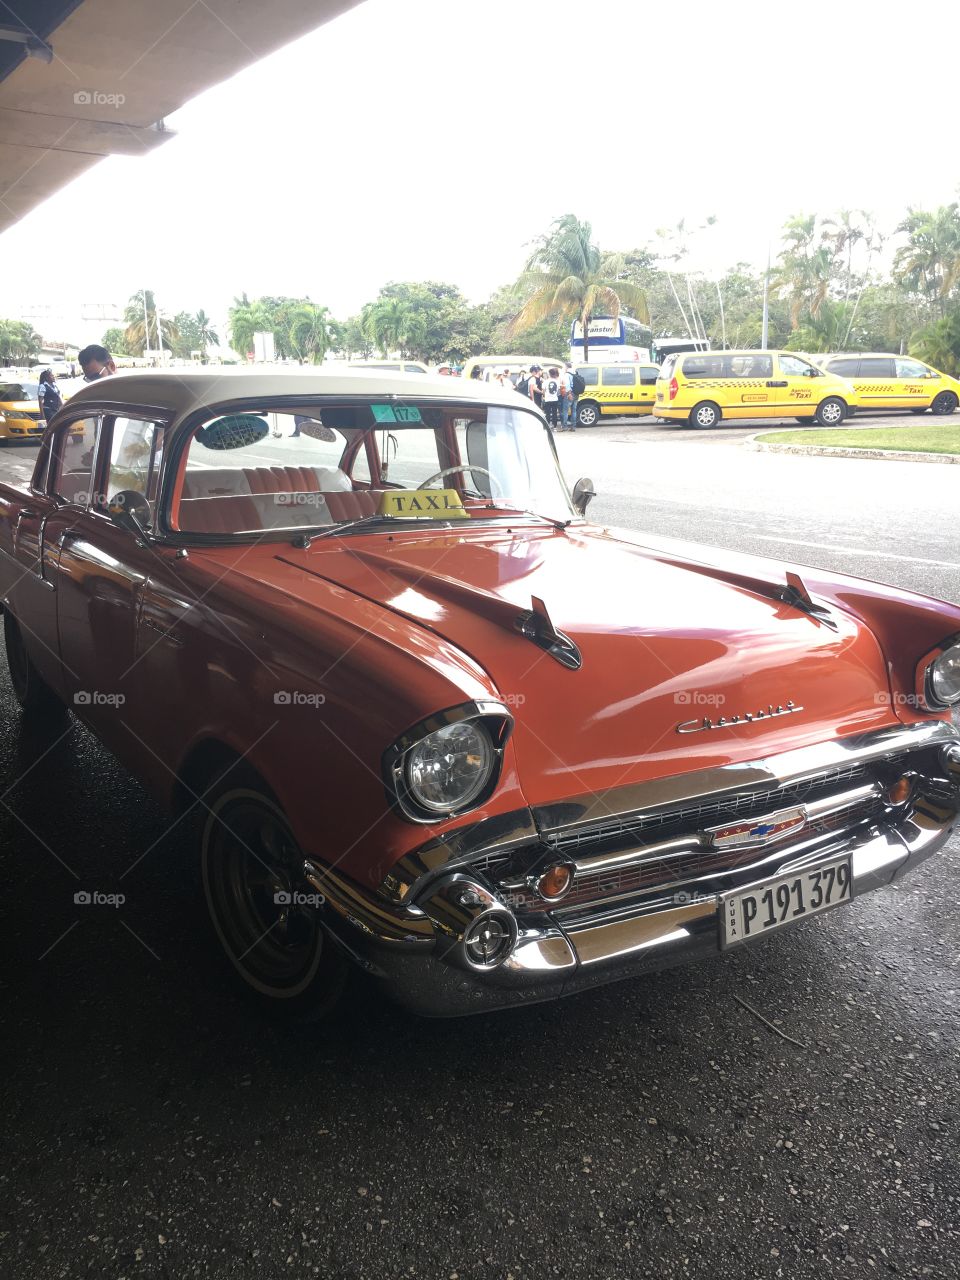 Our airport transfer upon arriving in Cuba. Let the time travel begin! Loved this gorgeous classic car